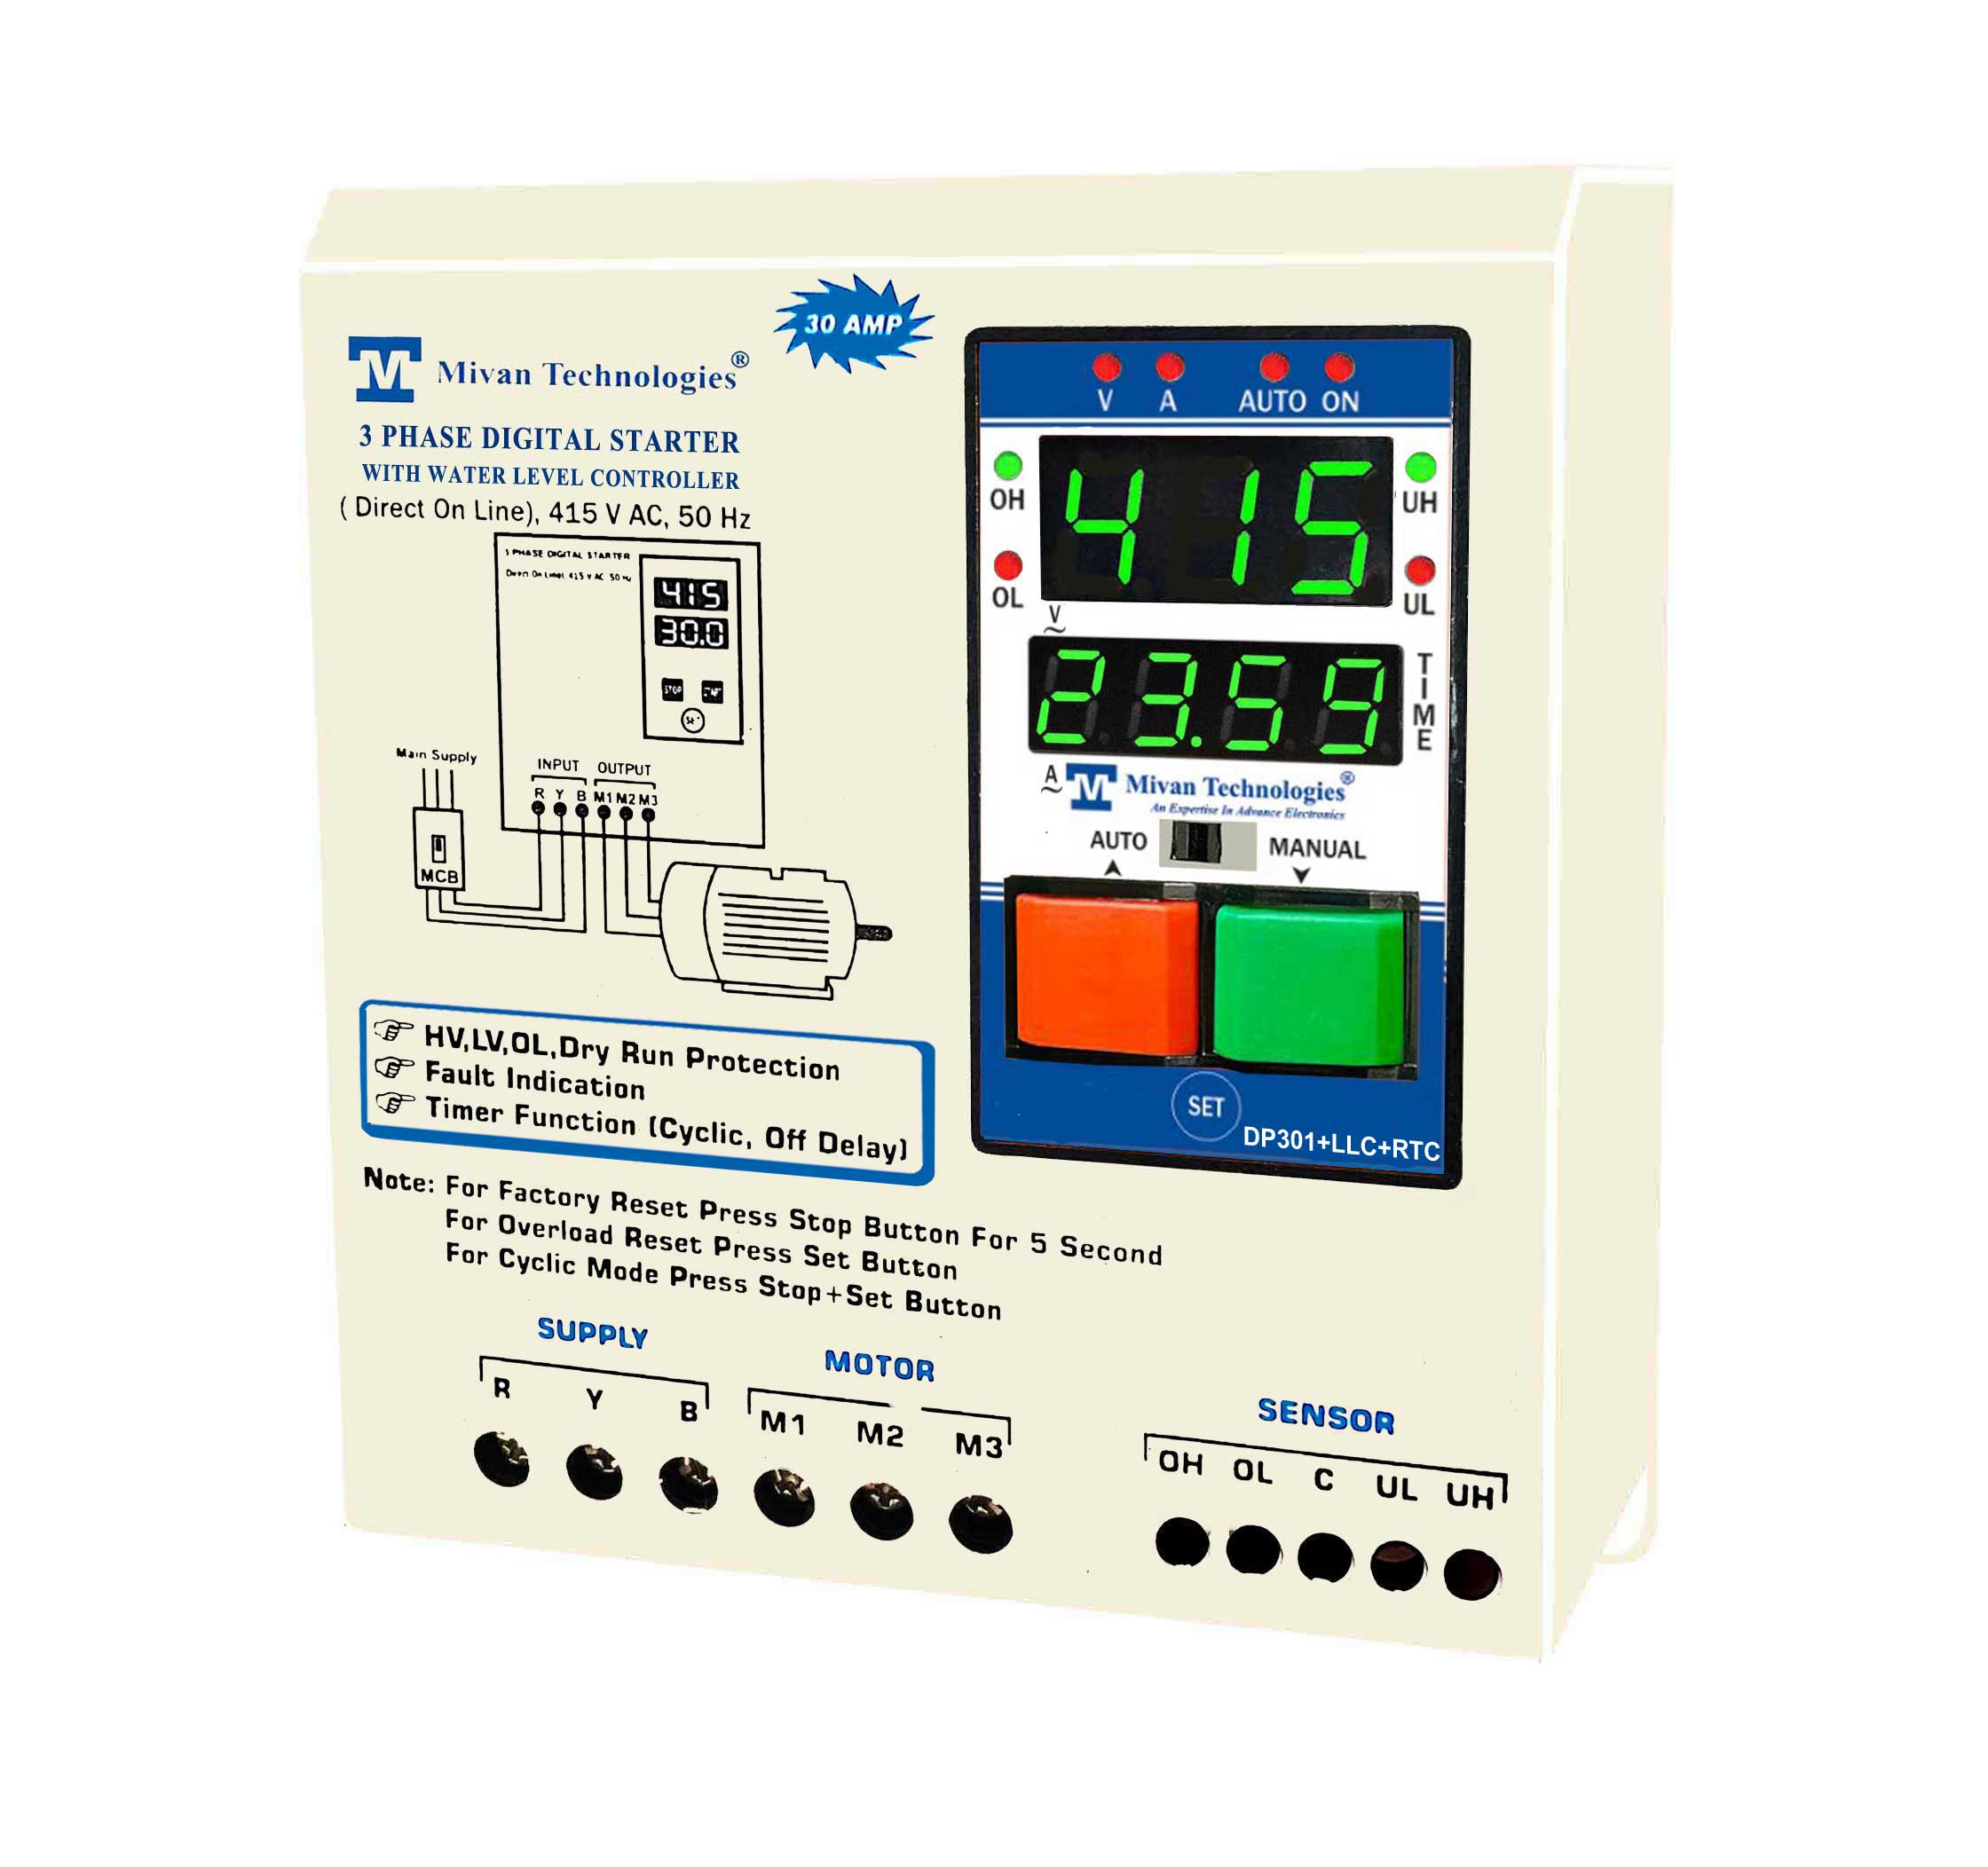 DP301 LLC RTC 3 PHASE Digital water controller with REAL TIME TIMER with DOL starter with V A meter with HV LV OL DRY PROTECTION with cyclic TIMER with SPP and Auto switch